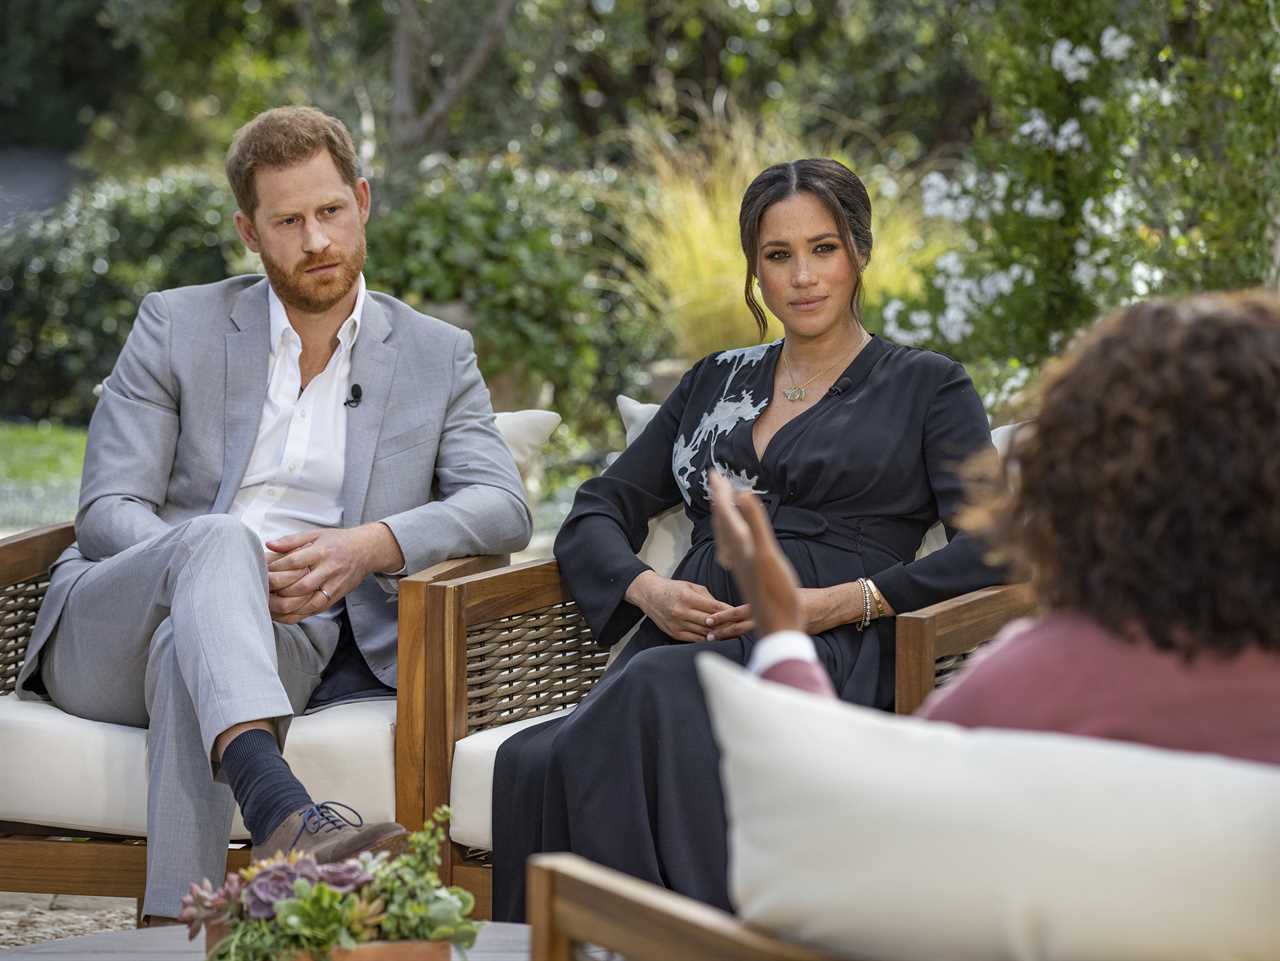 How Queen dismissed Meghan Markle and Prince Harry’s Oprah interview as ‘nonsense’ – and how Philip reacted revealed